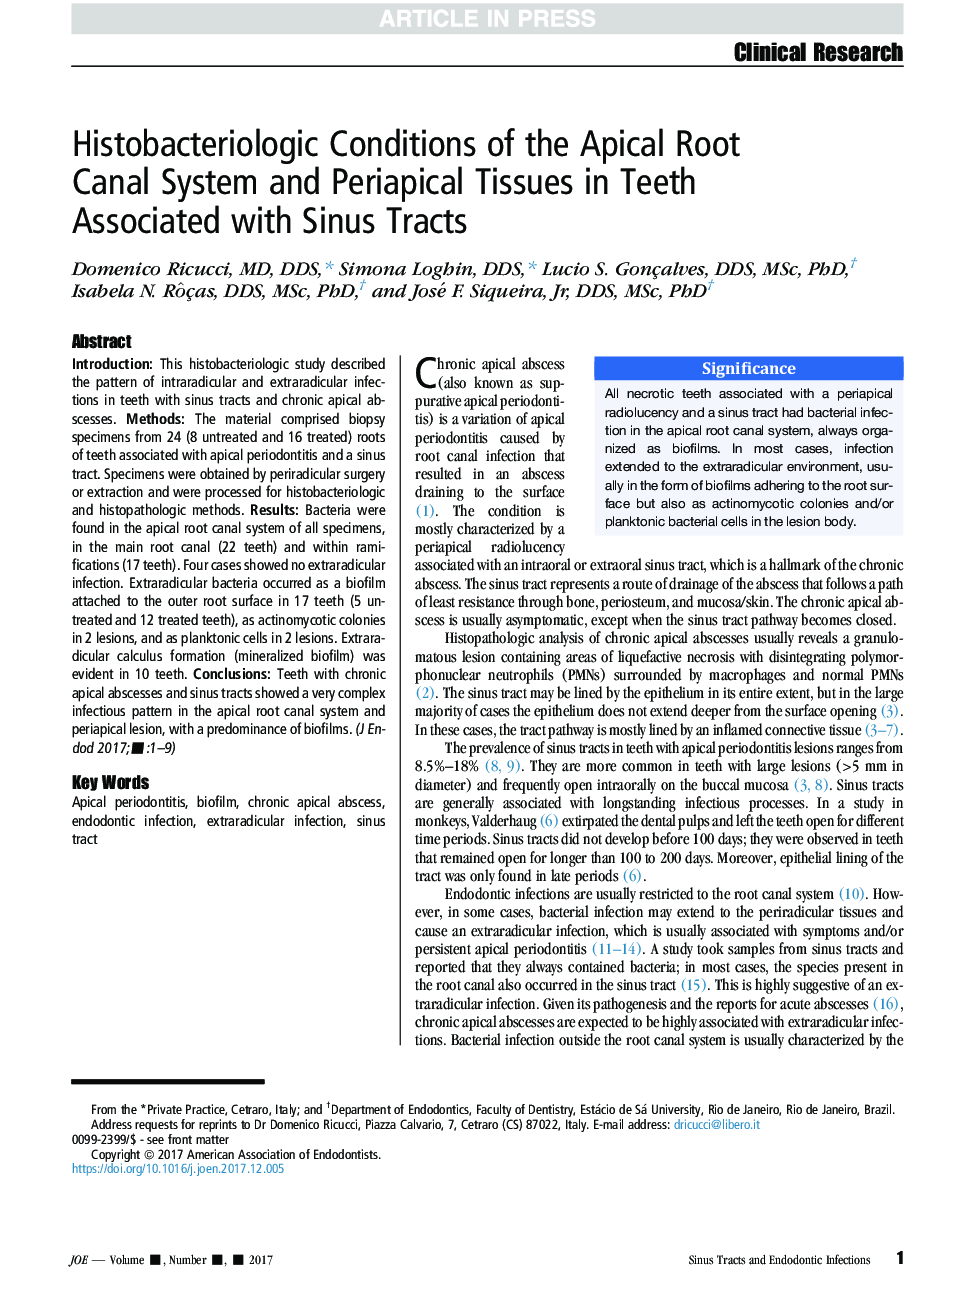 Histobacteriologic Conditions of the Apical Root Canal System and Periapical Tissues in Teeth Associated with Sinus Tracts